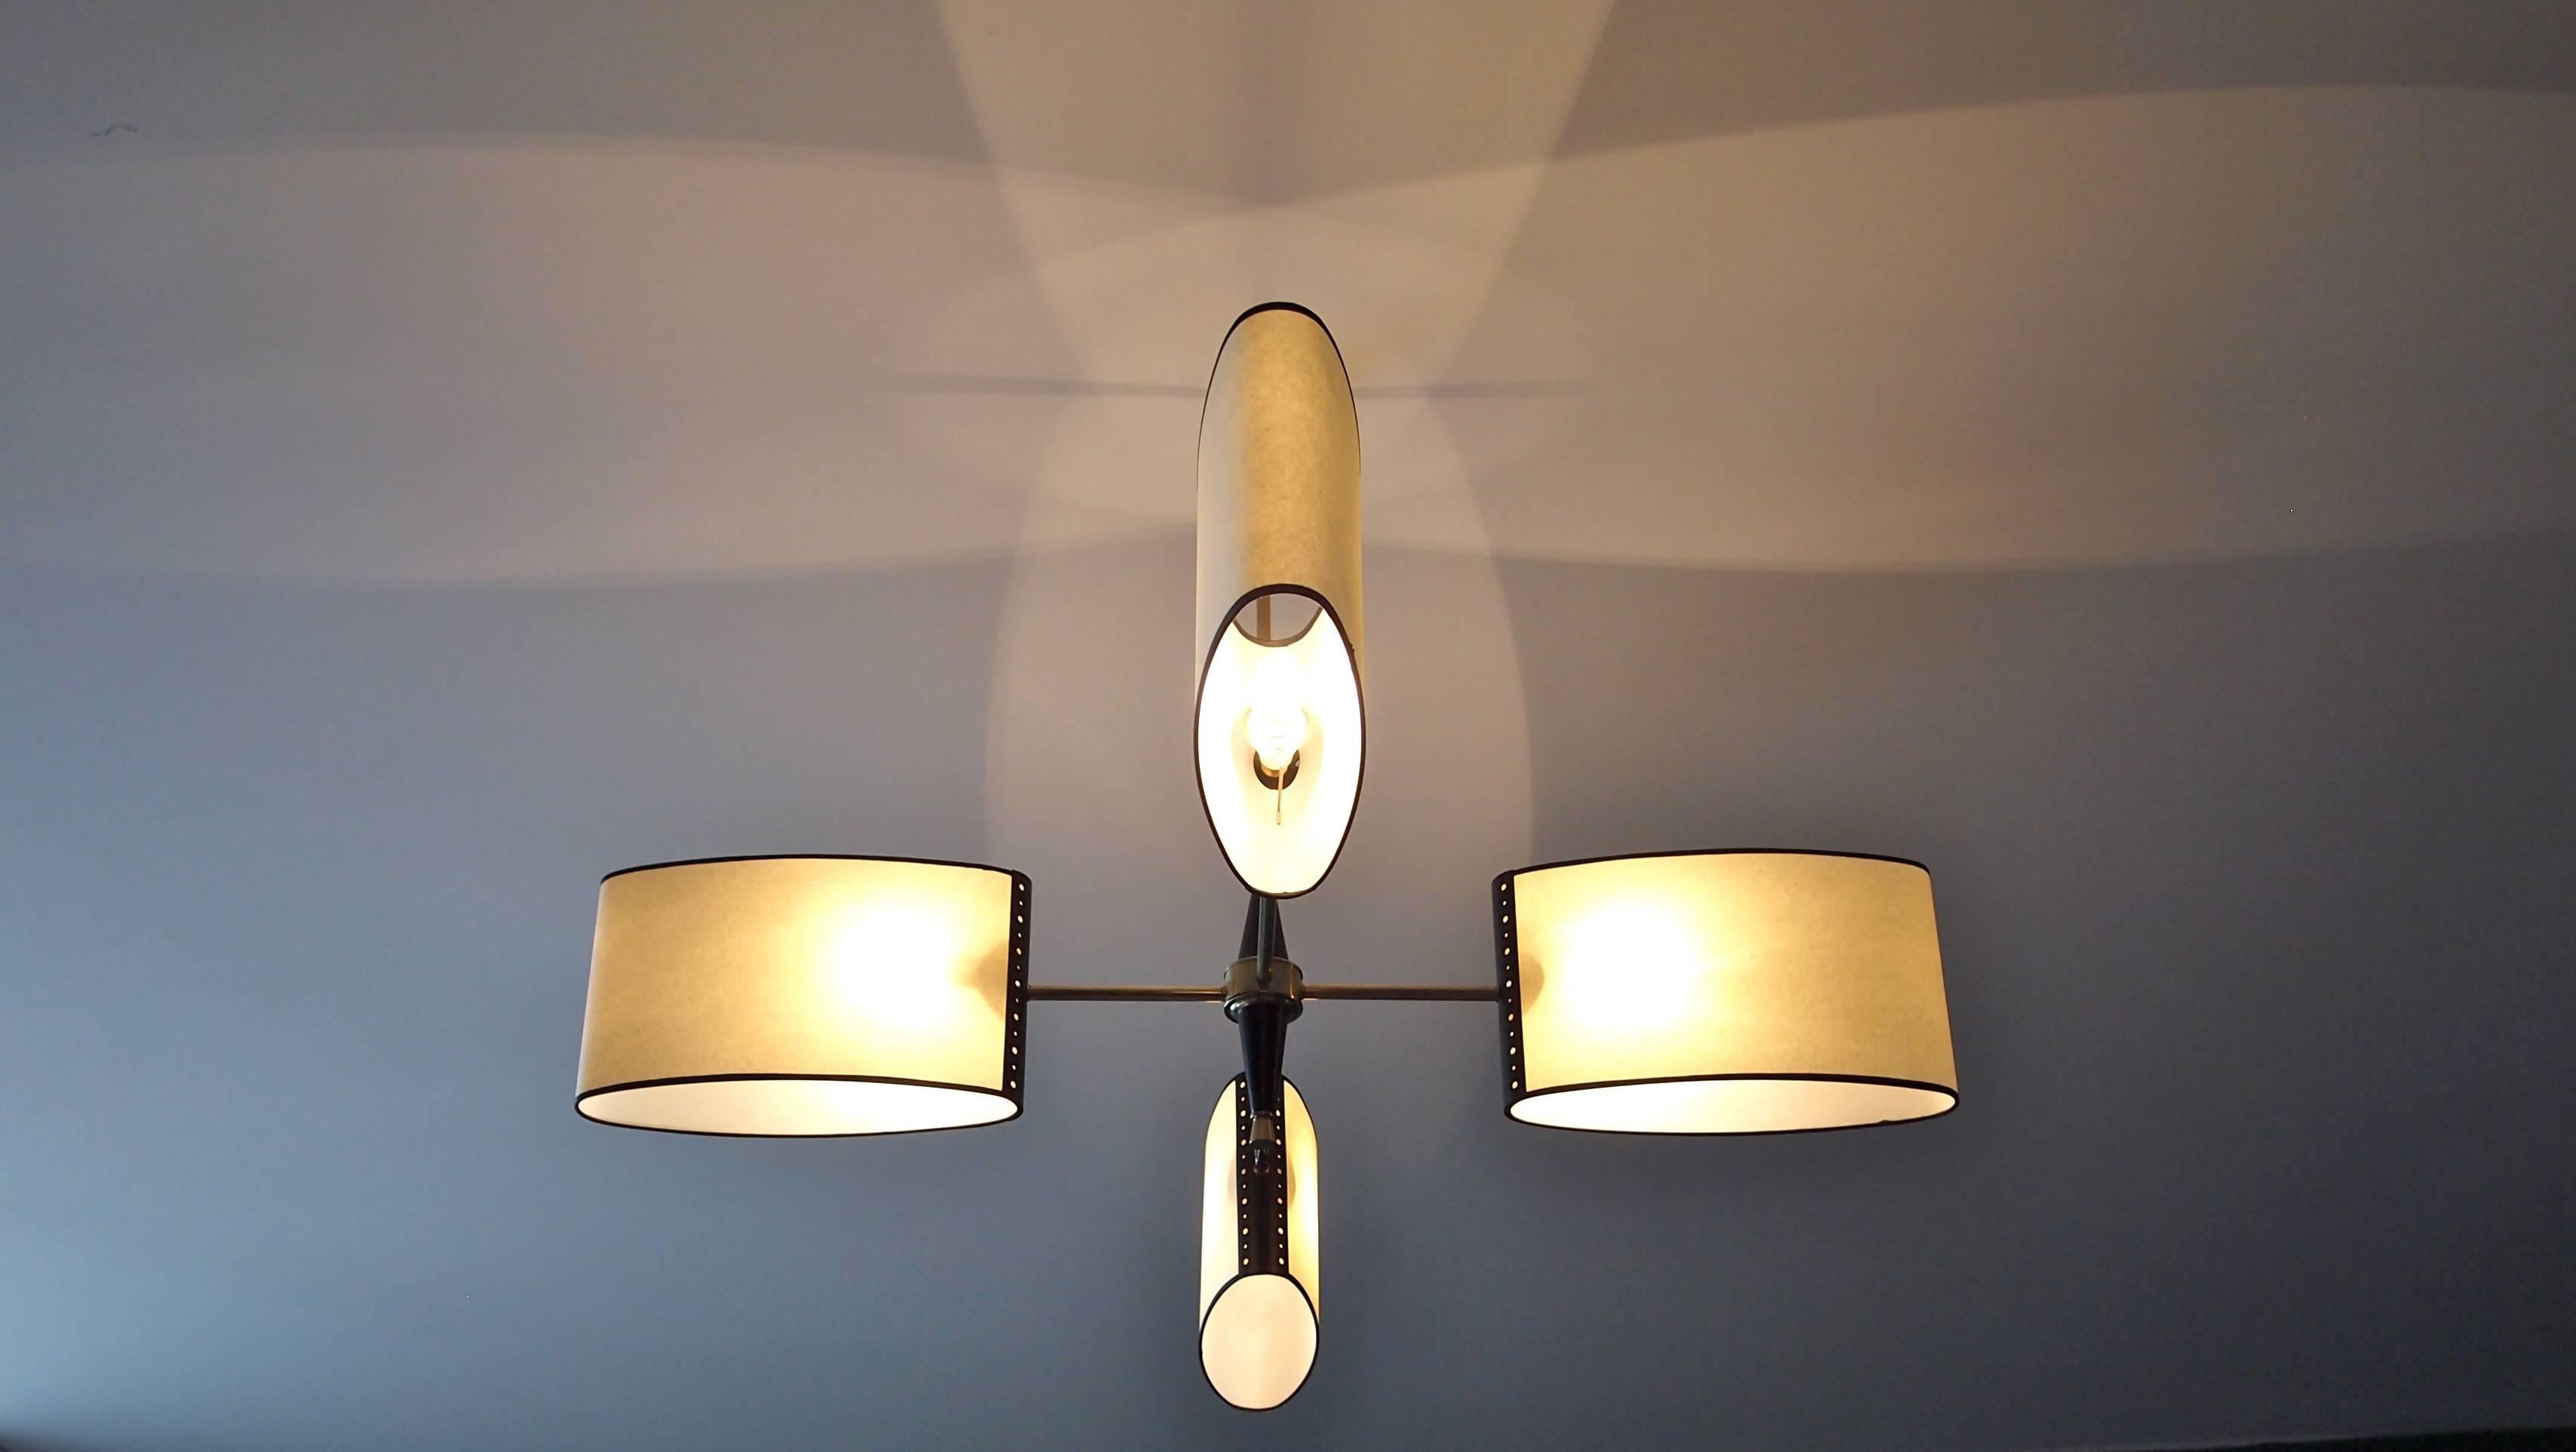 Mid-Century Modern 1950s Chandelier with Shifted Lighted Arms by Maison Lunel